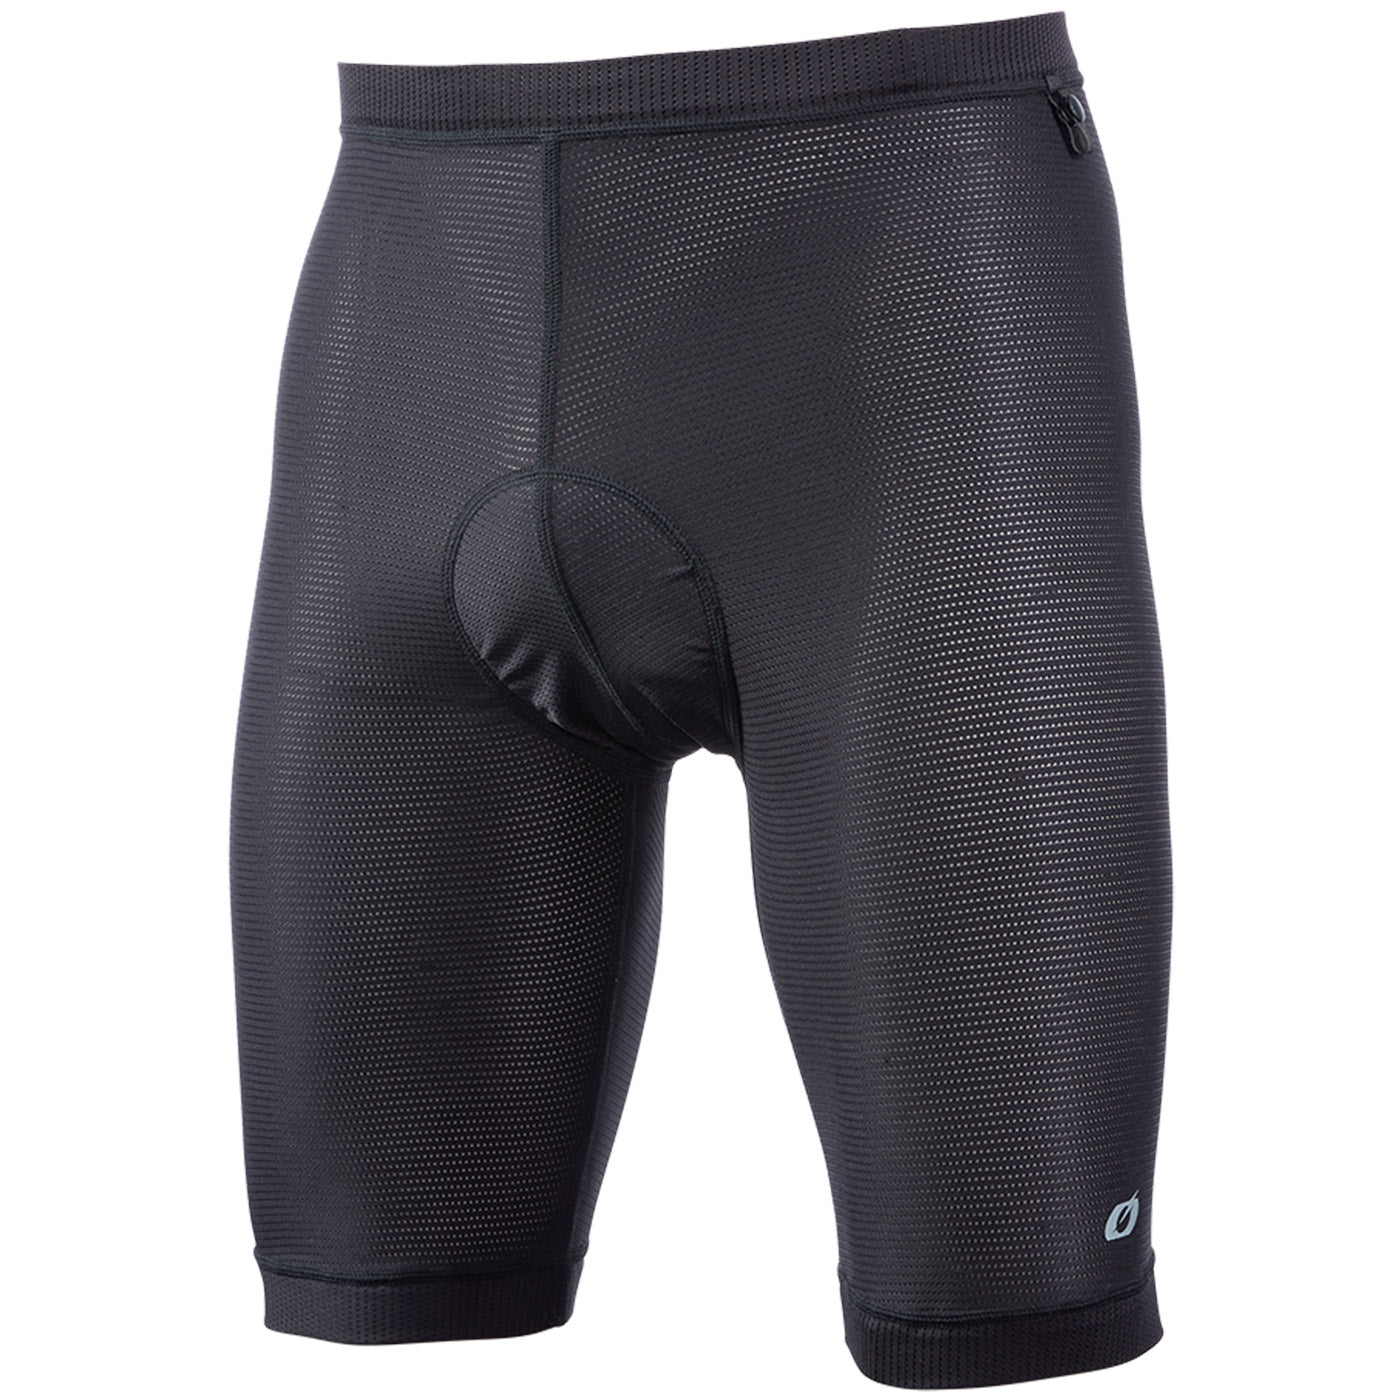 Cycling boxers and briefs for man